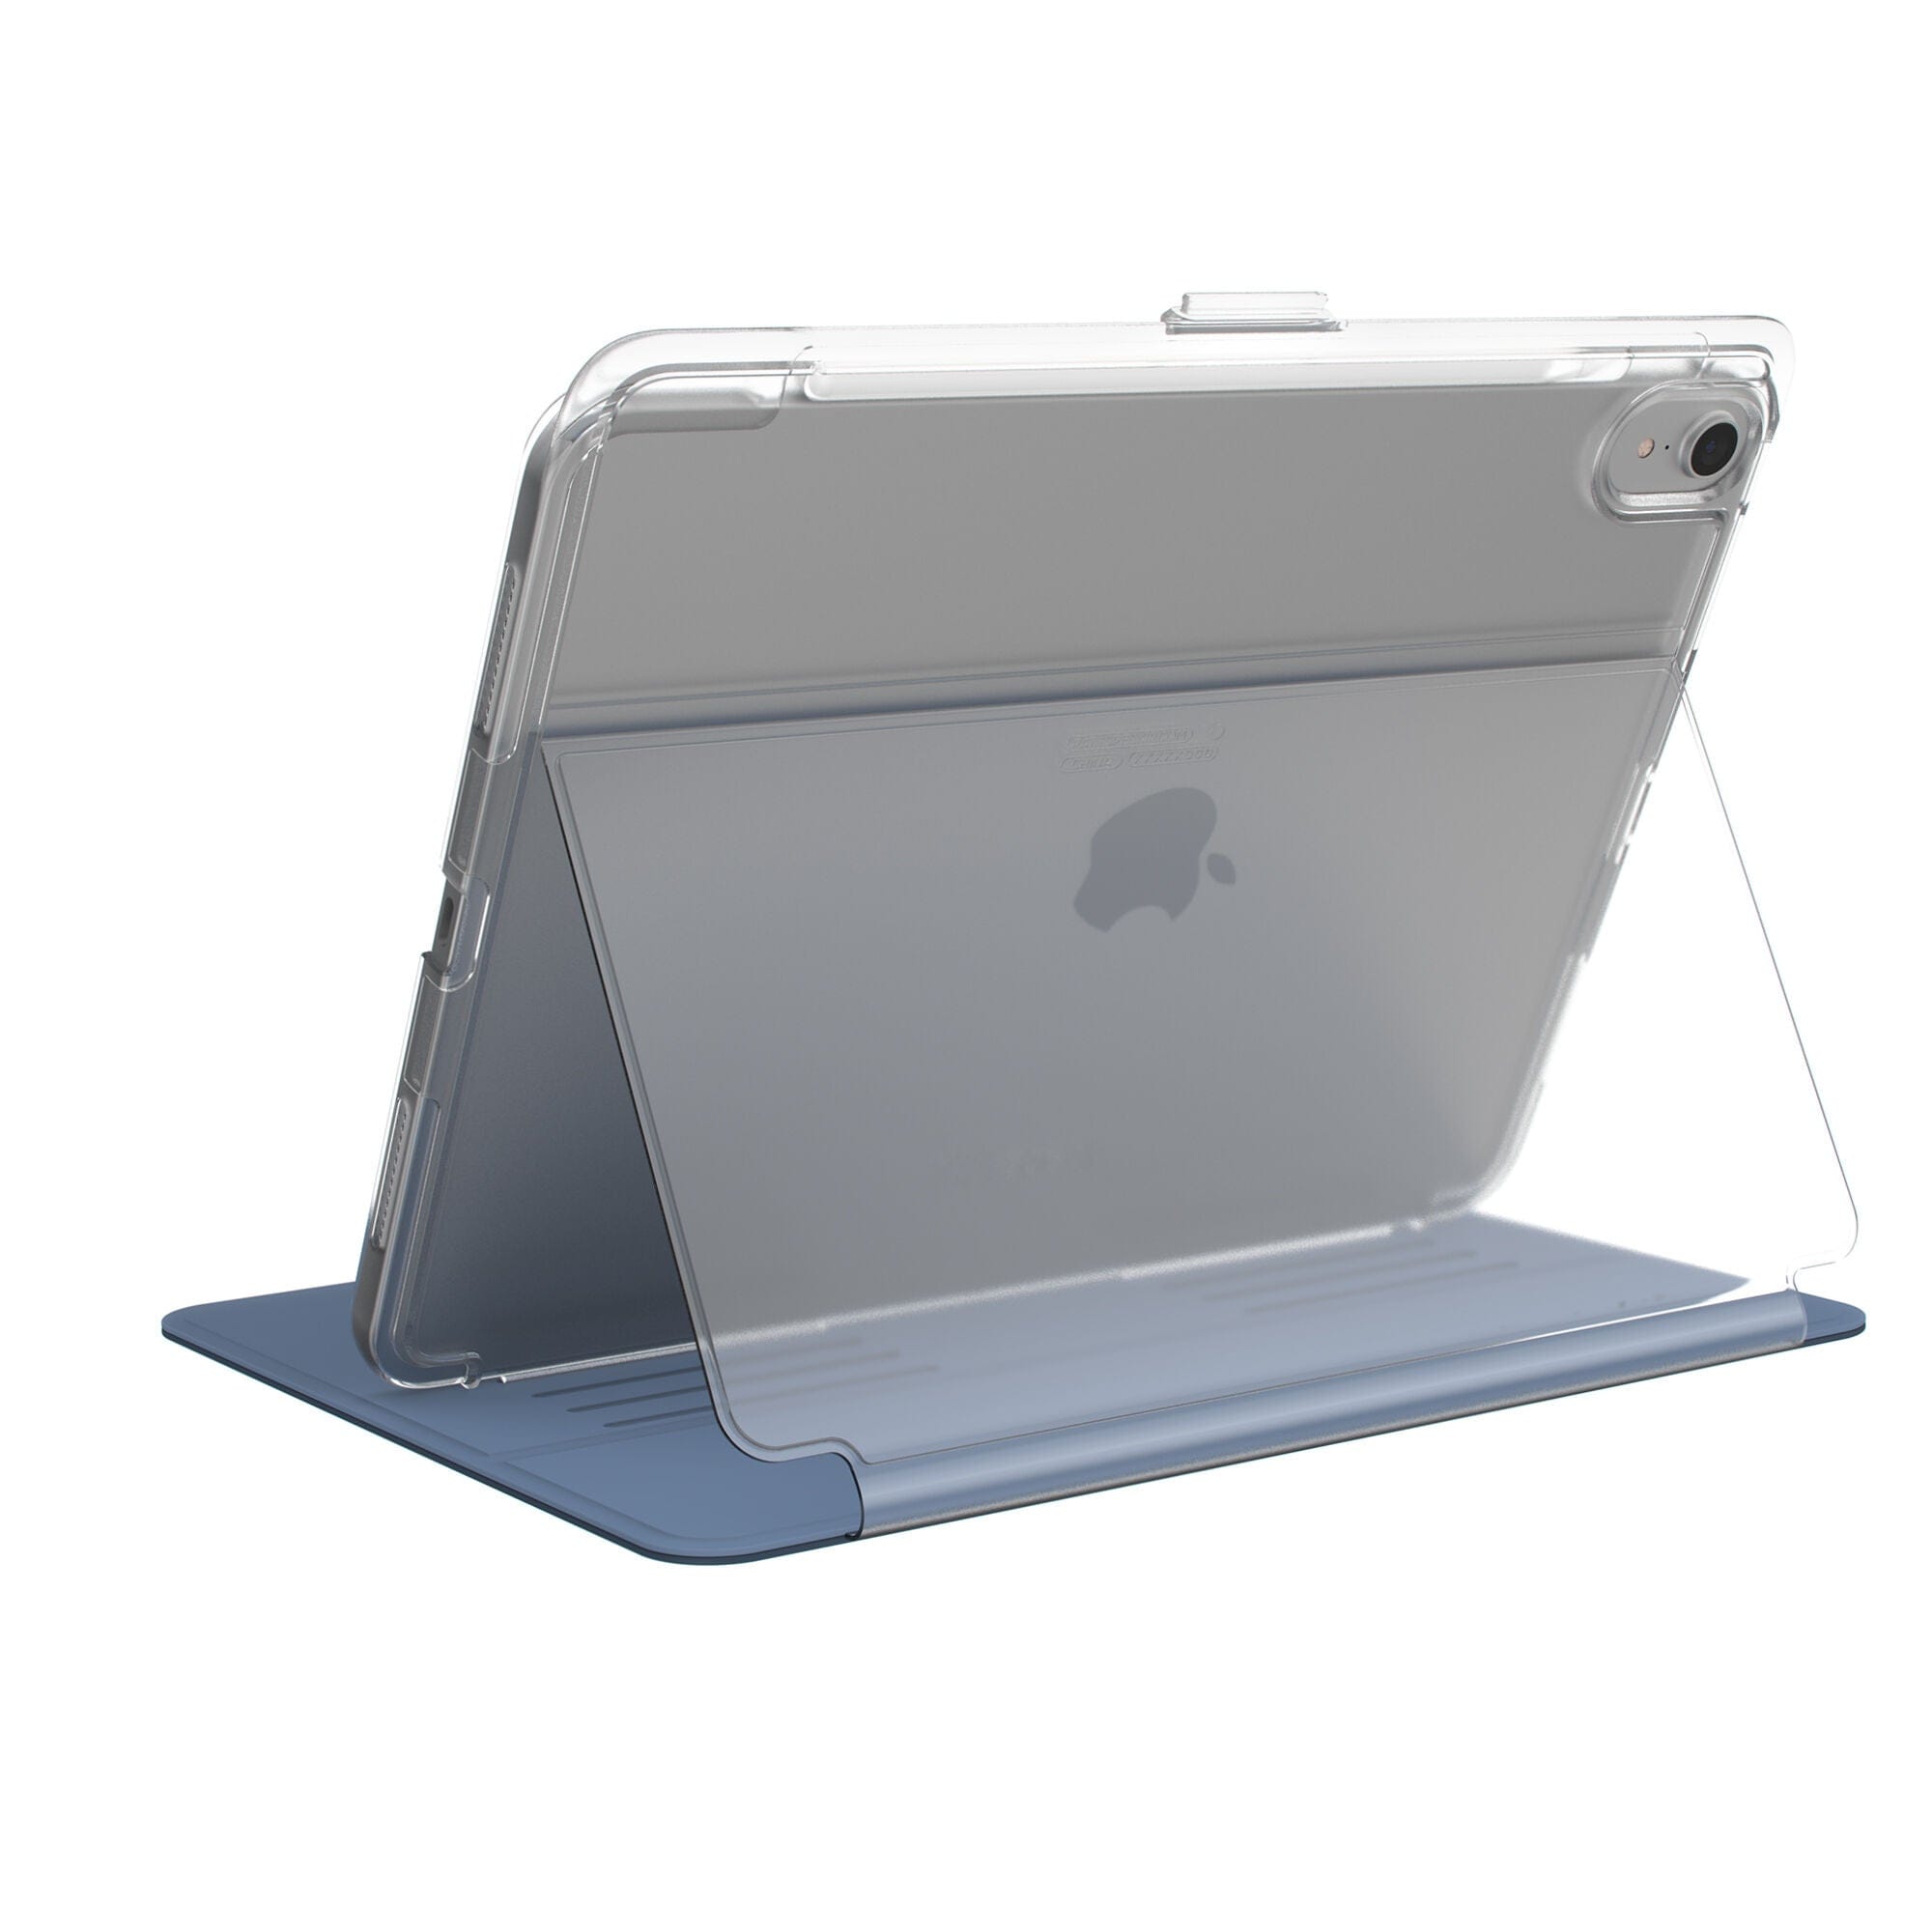 Speck Balance Folio Clear 11-inch iPad Pro (2018) Cases Best 11